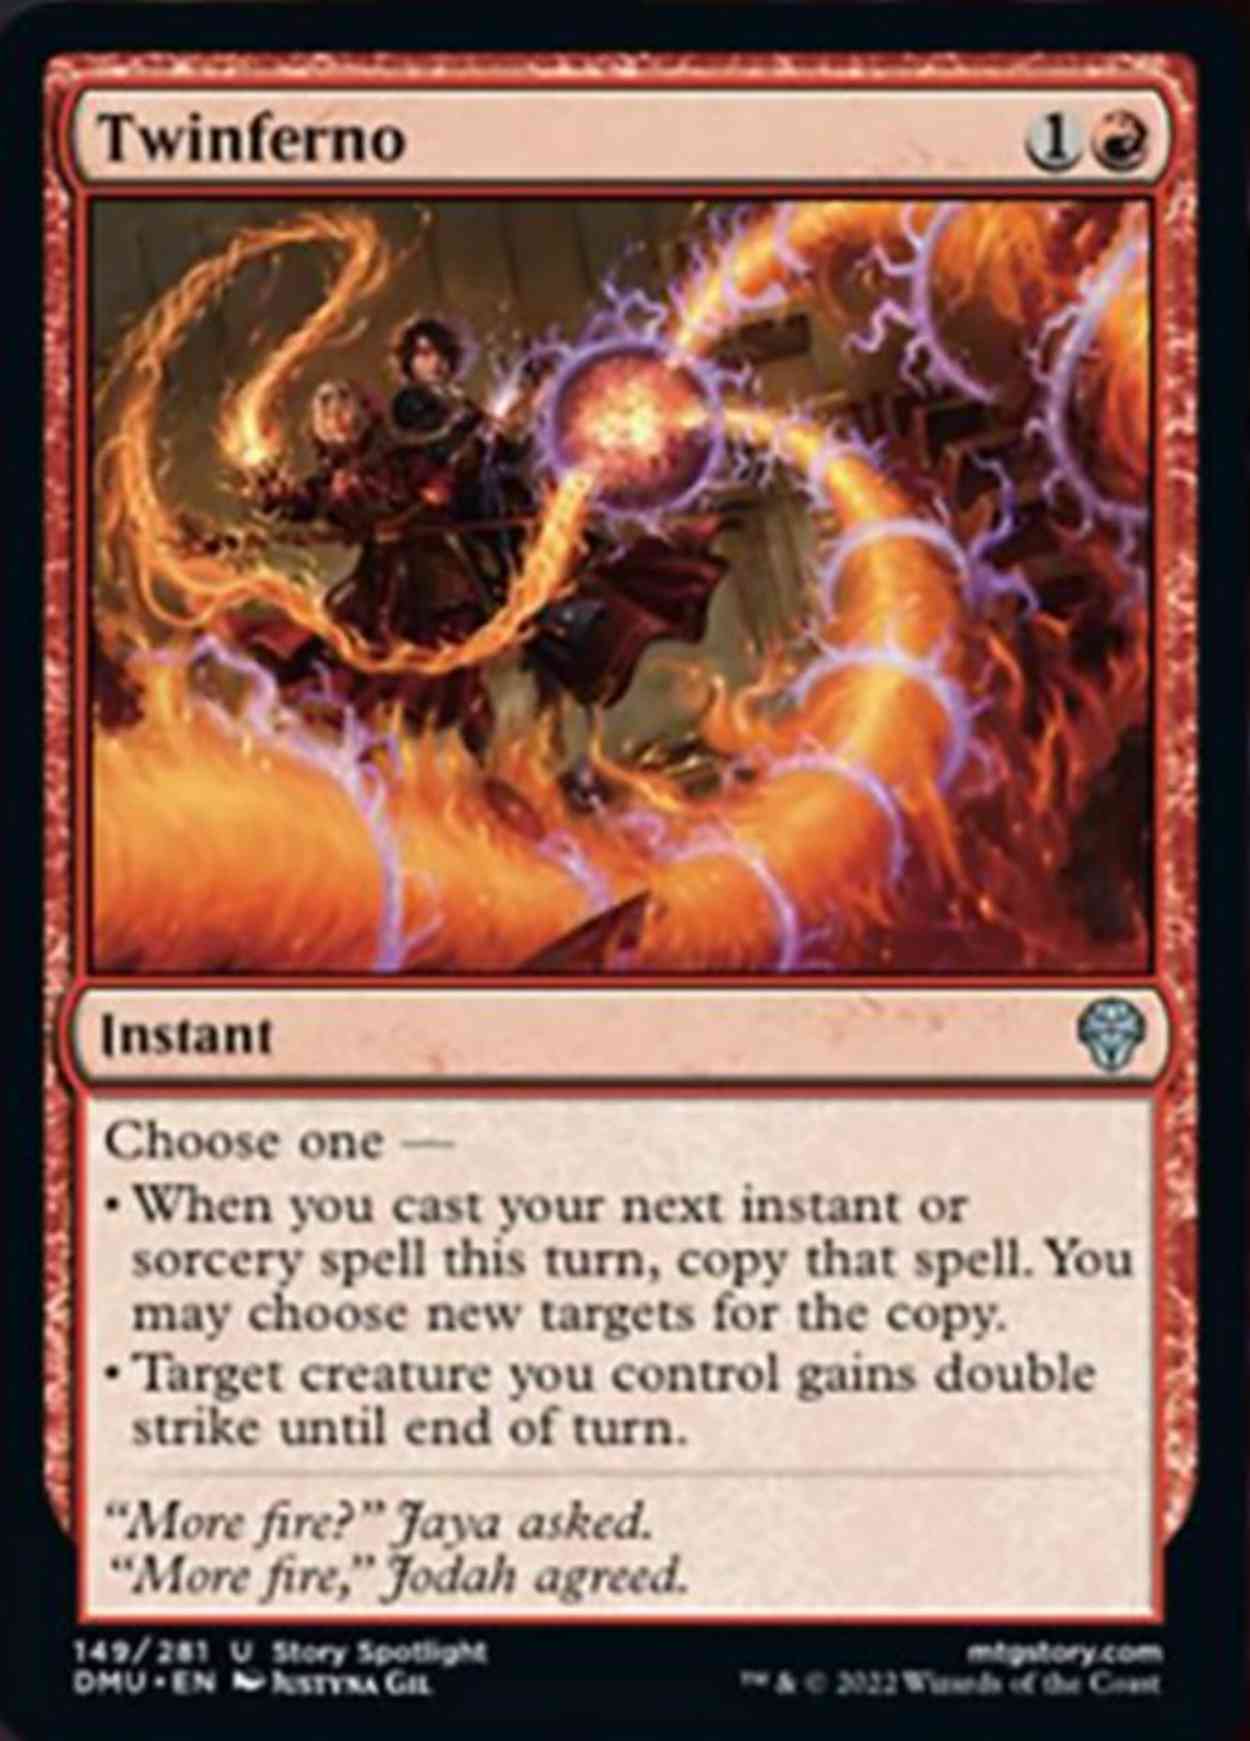 Twinferno magic card front